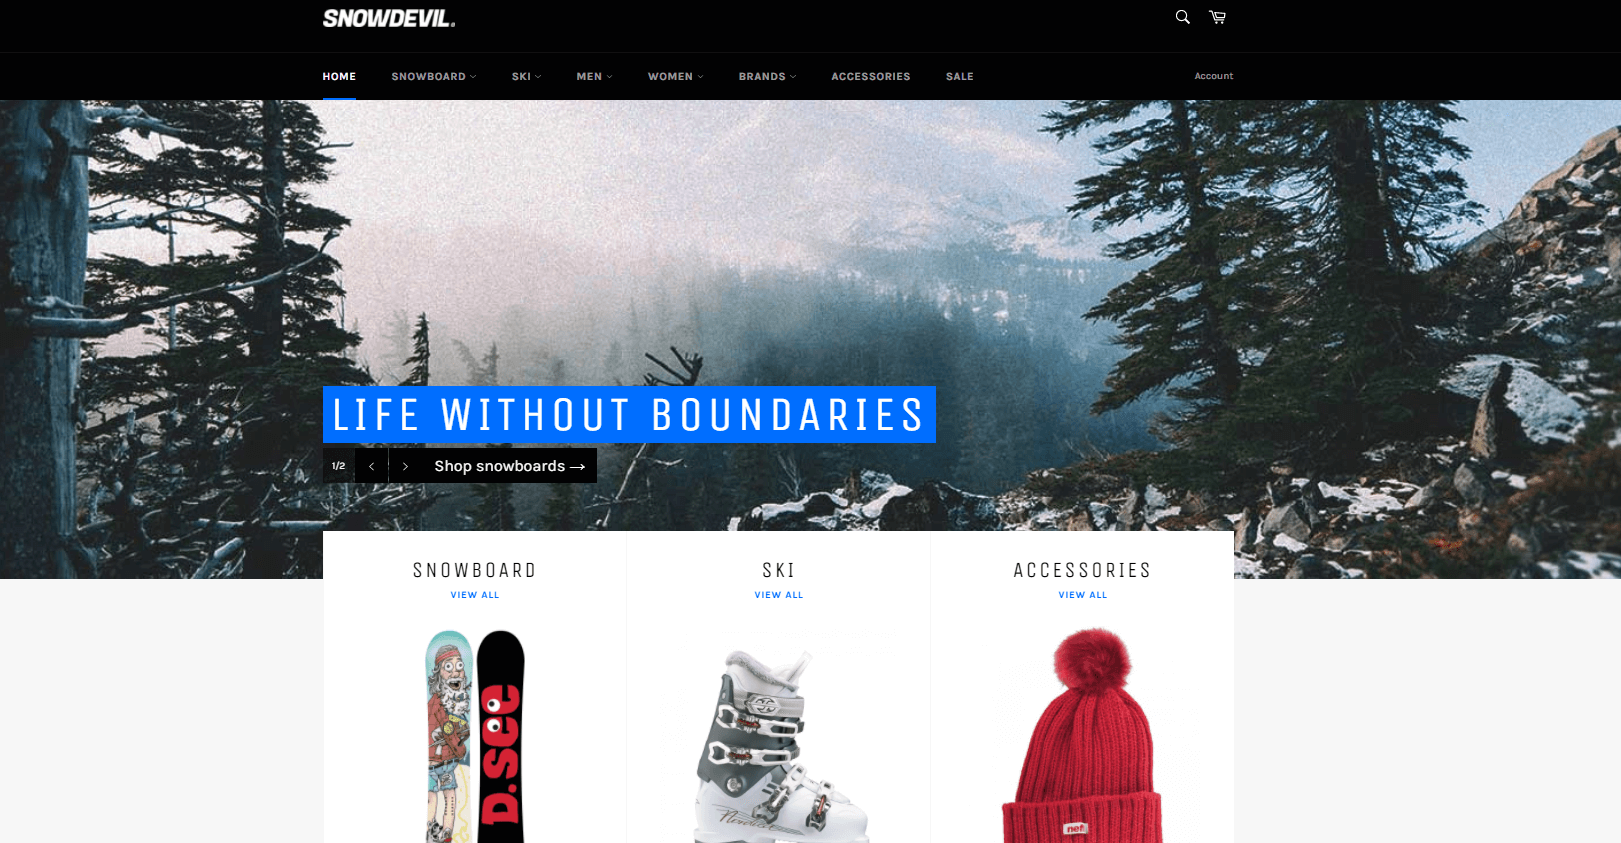 Shopify Store Snowdevil Using Venture Shopify Theme For Sports Adventure Industry